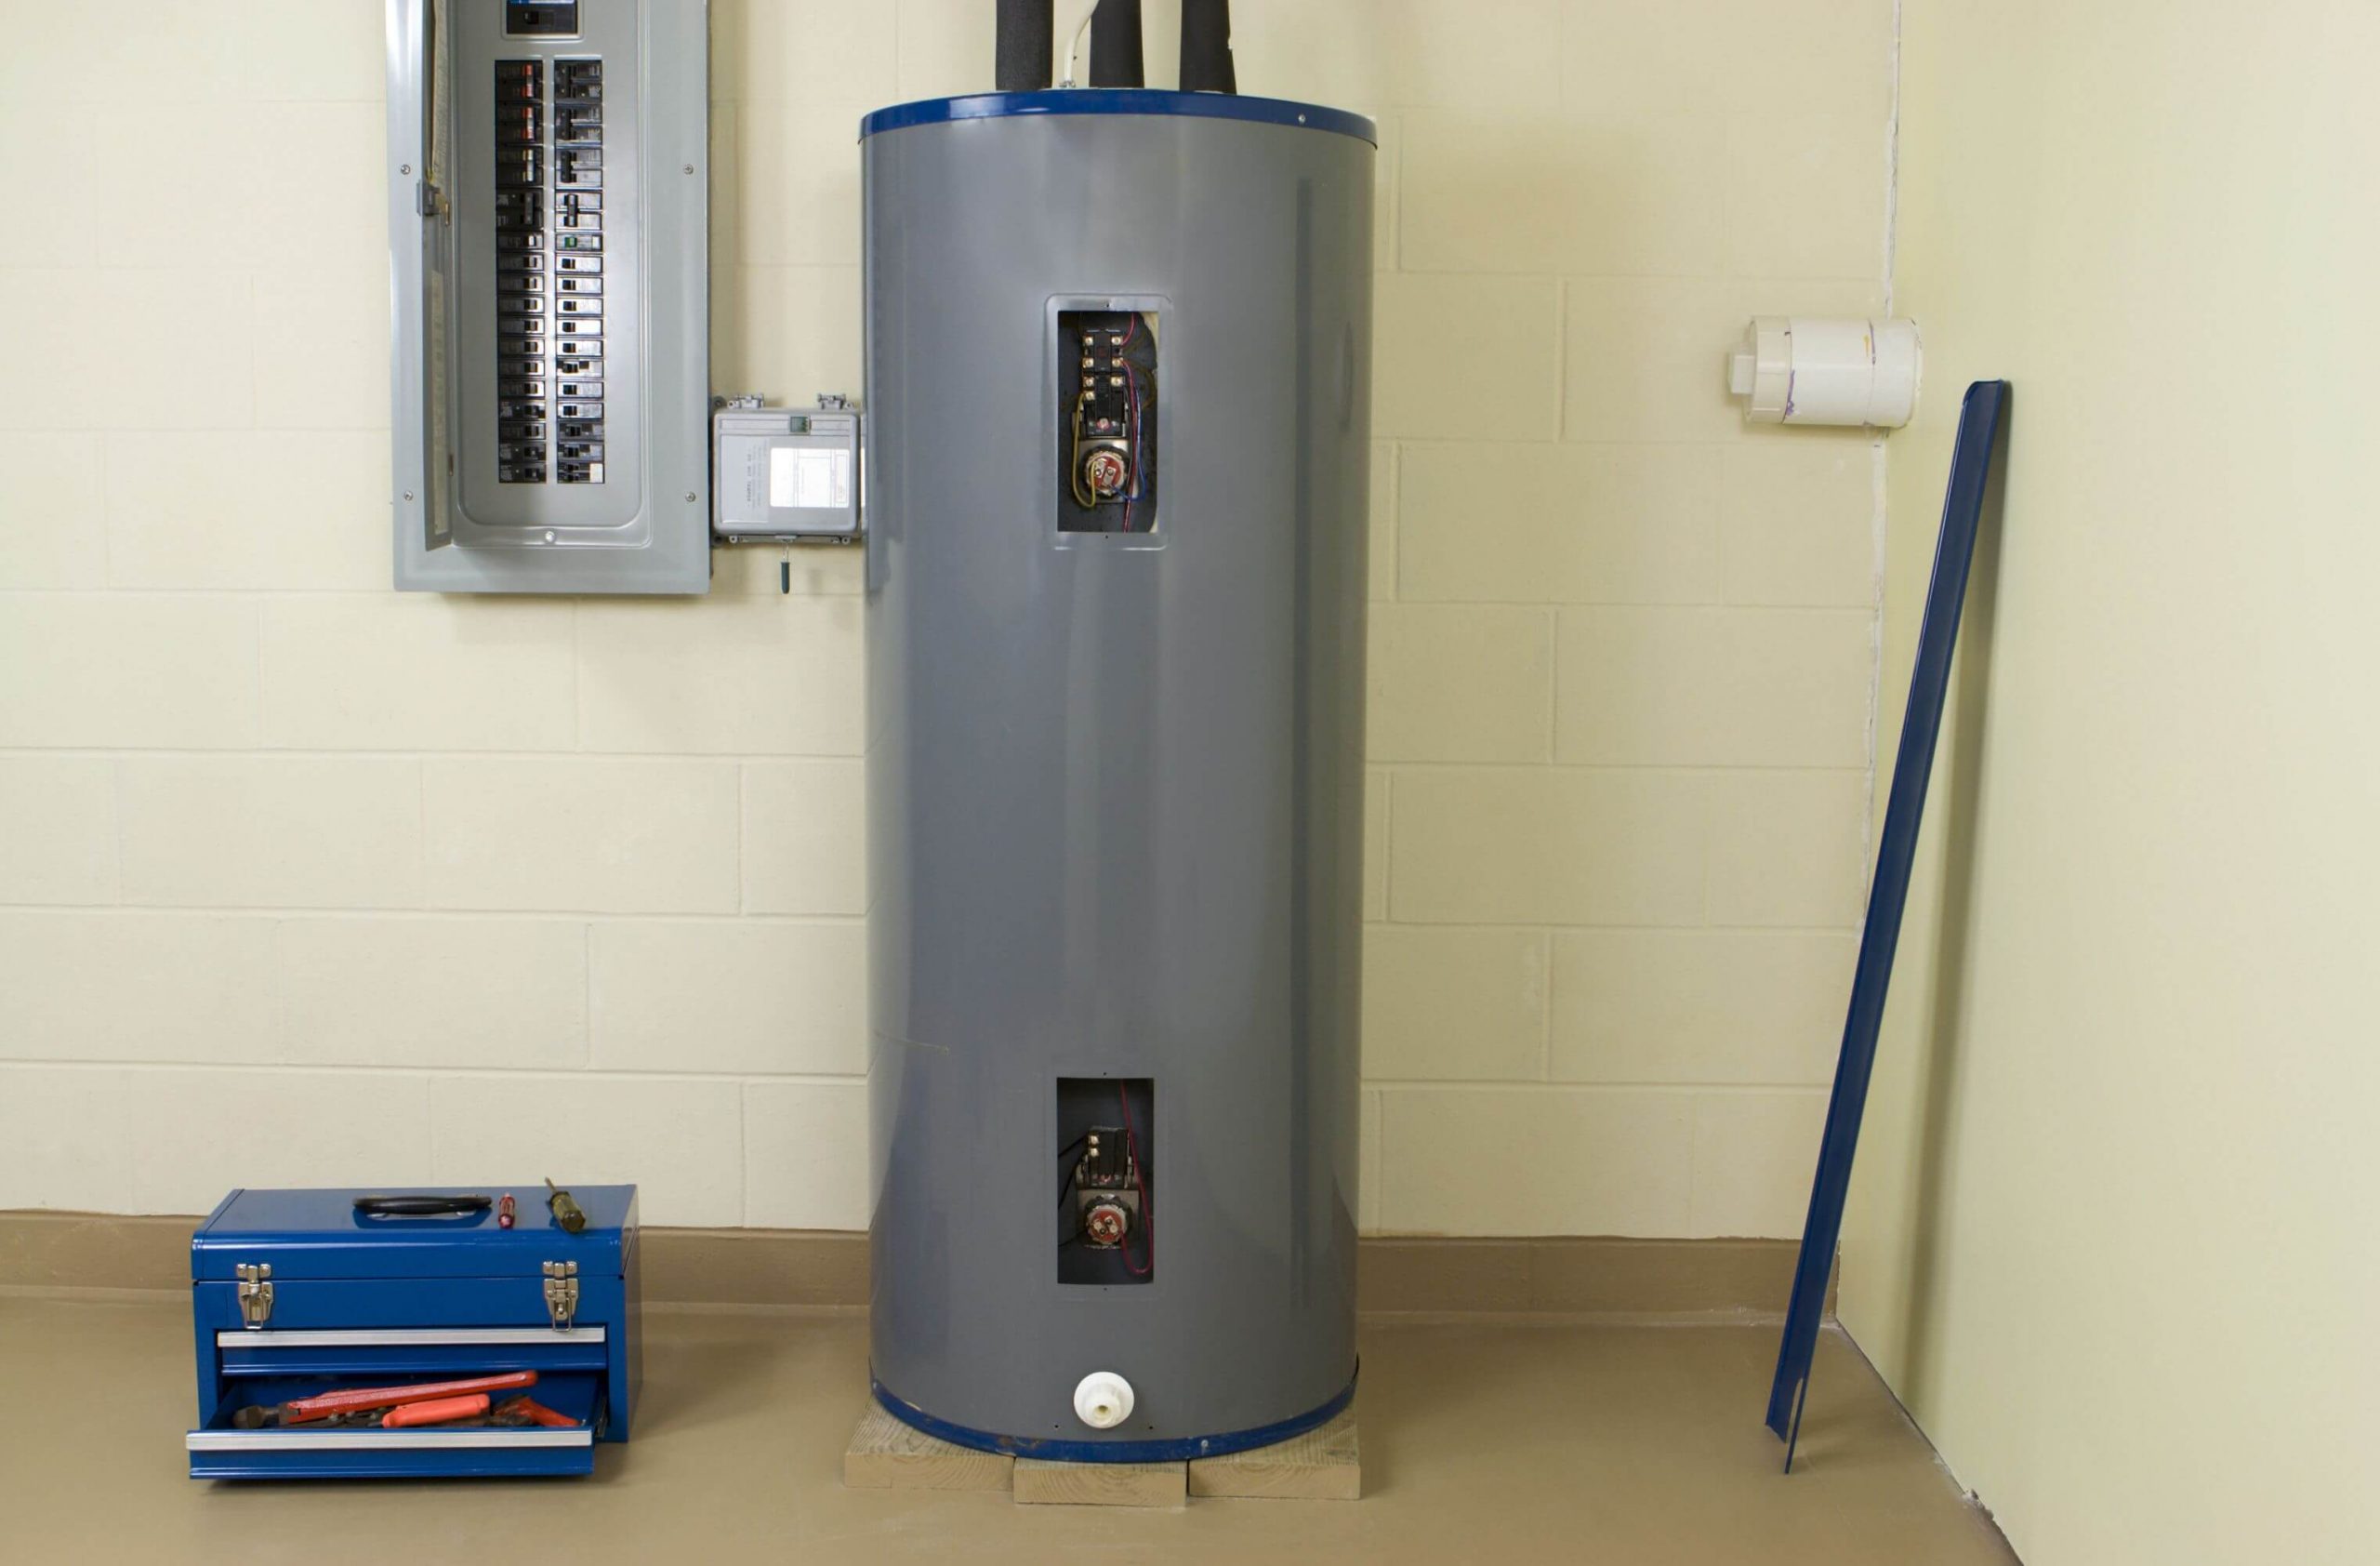 What to Do When Water Heater Breaks